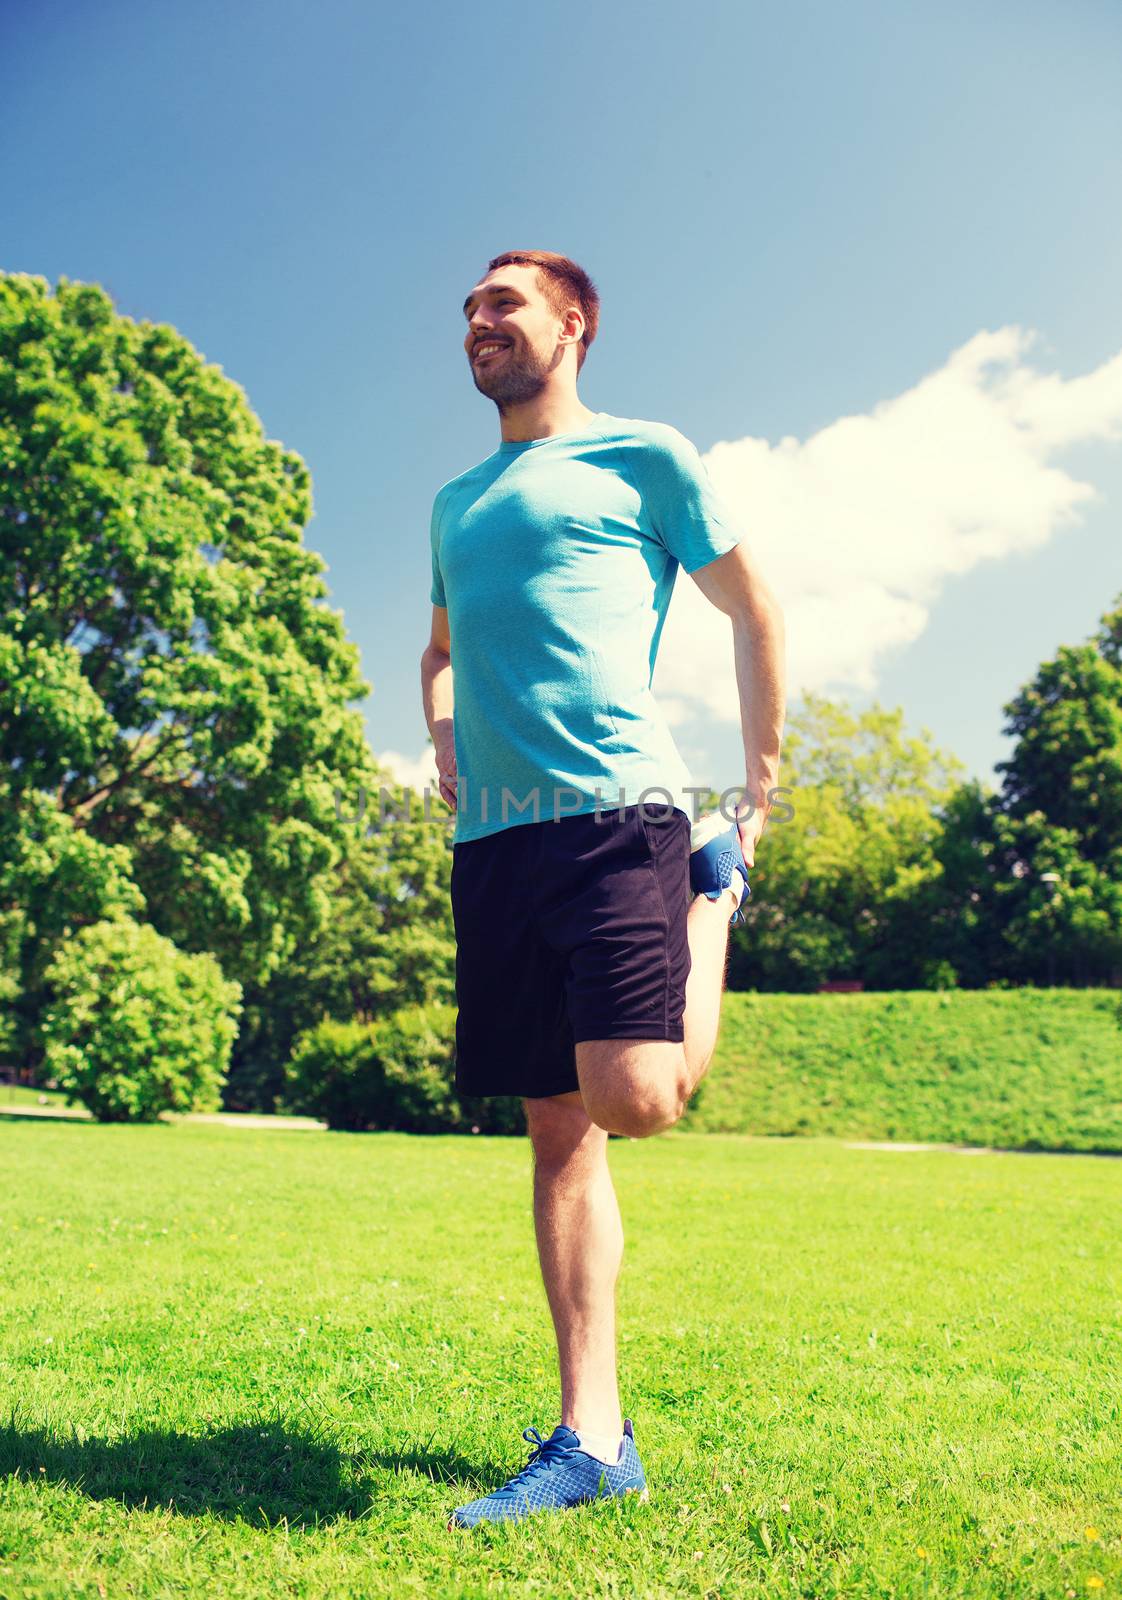 fitness, sport, training and lifestyle concept - smiling man stretching leg outdoors